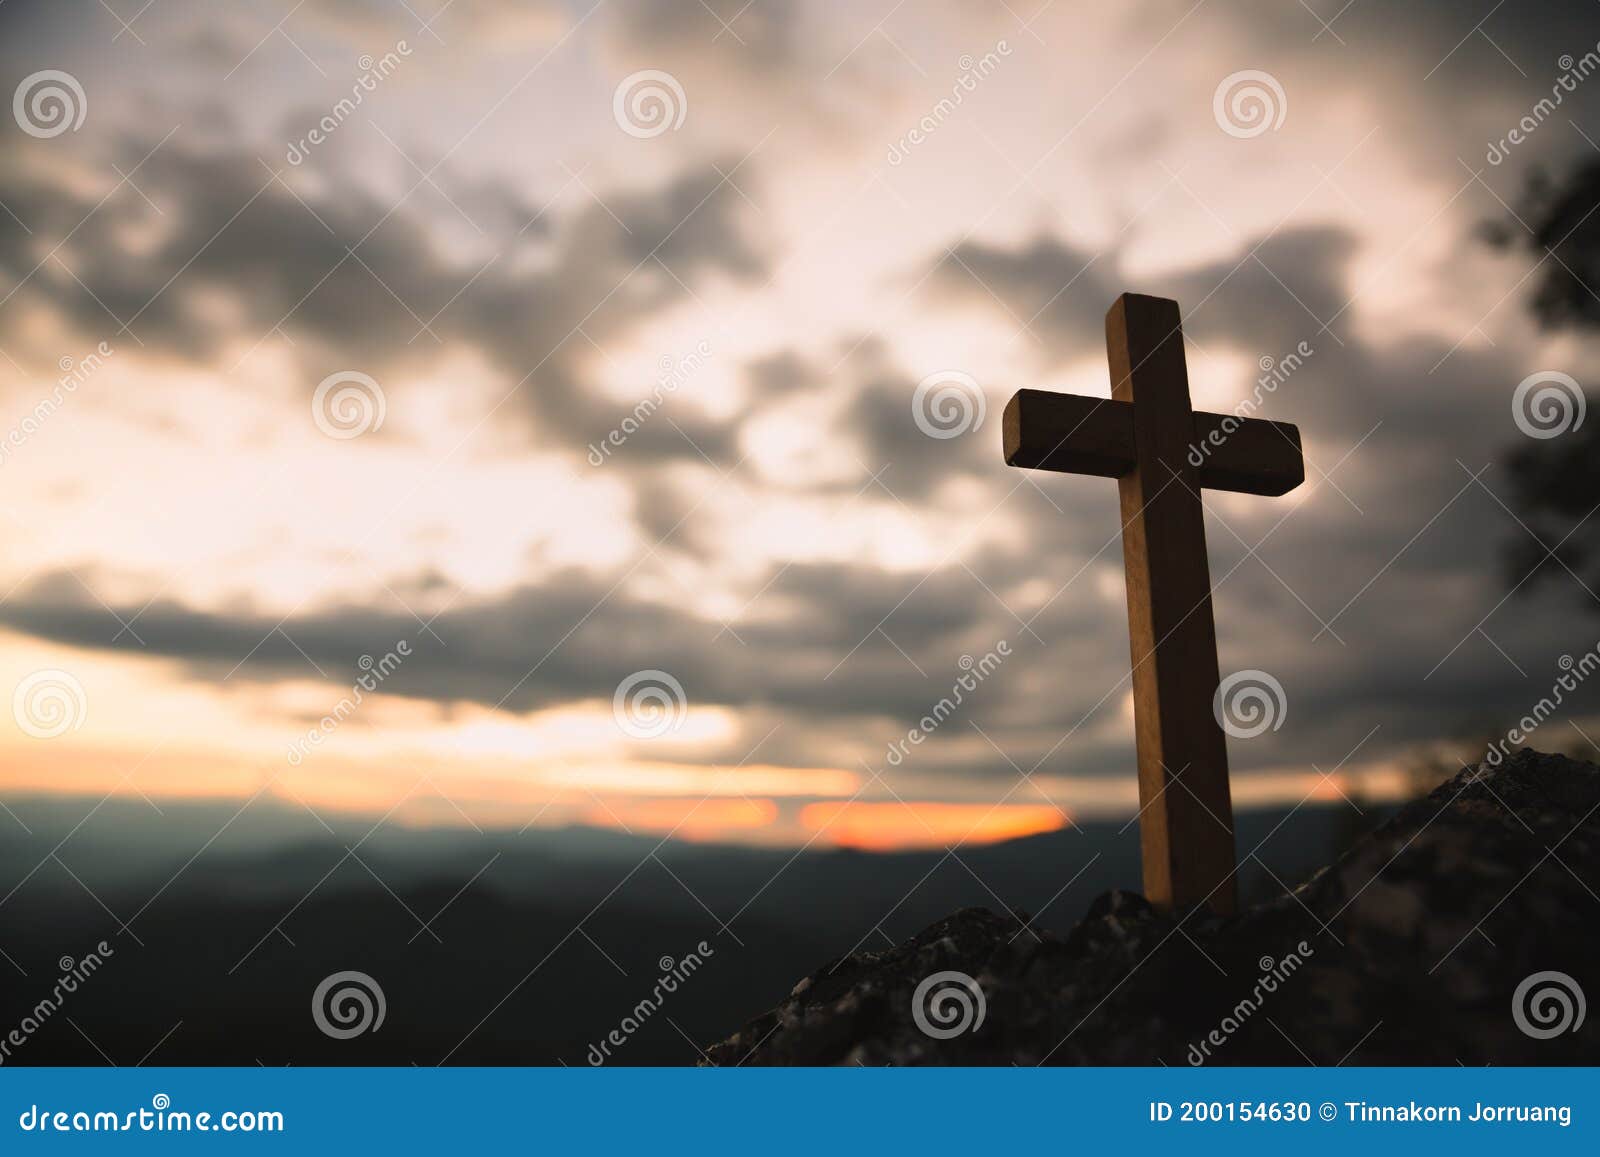 religious . christian wooden cross on a background with dramatic lighting,  jesus christ cross, easter, resurrection